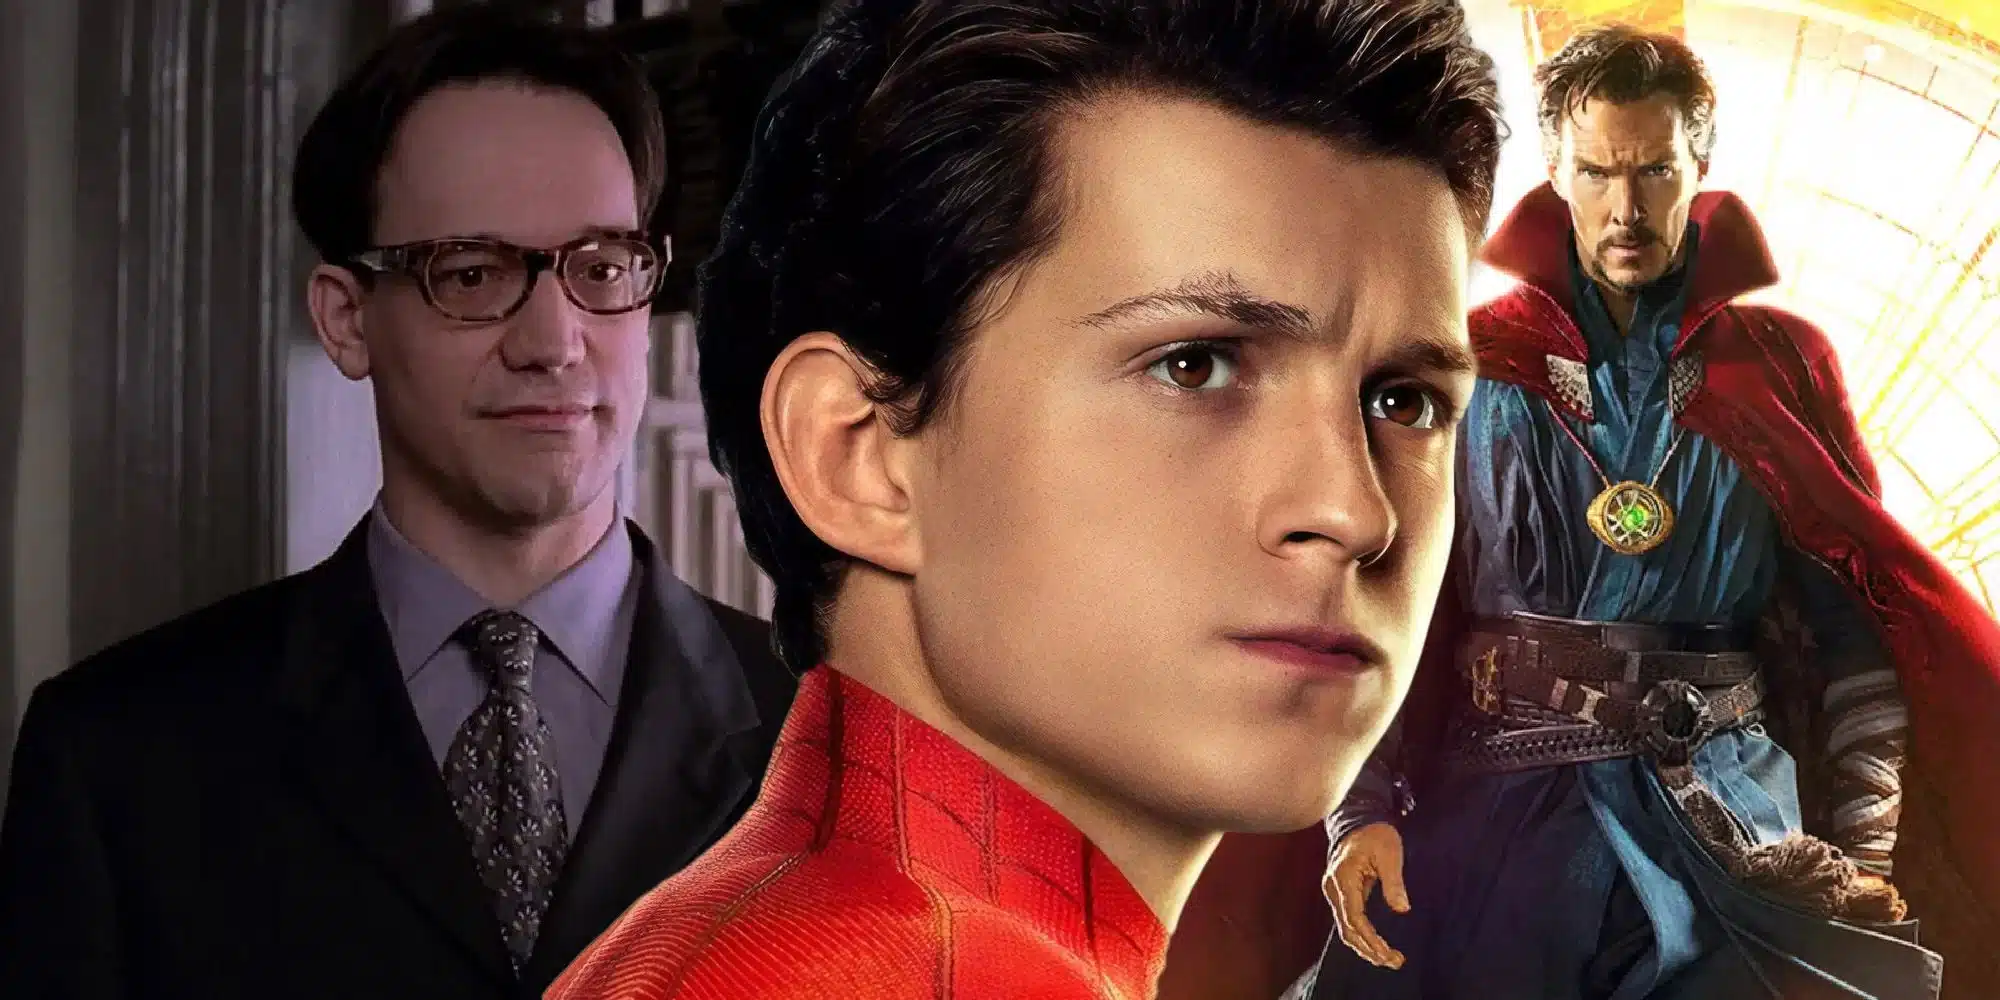 Sam Raimi Turned Down Doctor Stranger 2 Just Because Of Lingering Scars From Spider-Man 3